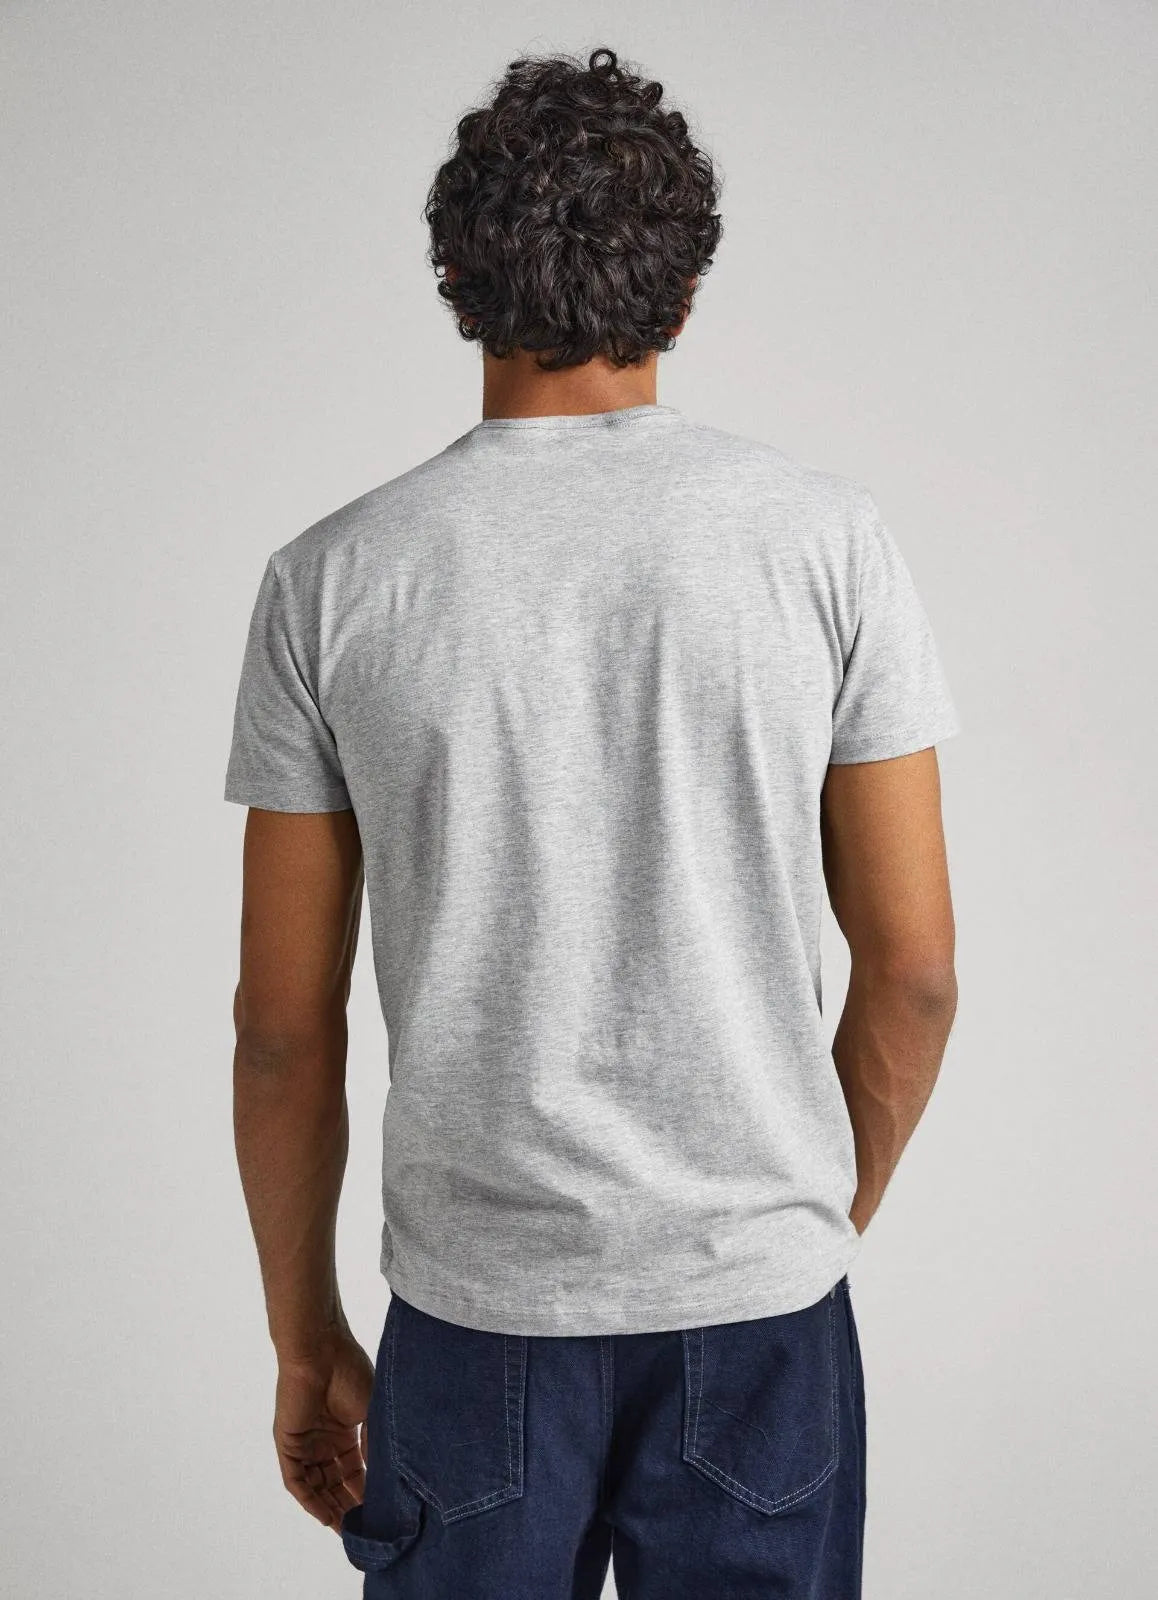 Grey men's t-shirt, Pepe Jeans, casual comfort and style. Look sharp and feel relaxed in the Pepe Jeans grey t-shirt, perfect for any occasion. Elevate your everyday wardrobe with the soft grey t-shirt from Pepe Jeans.